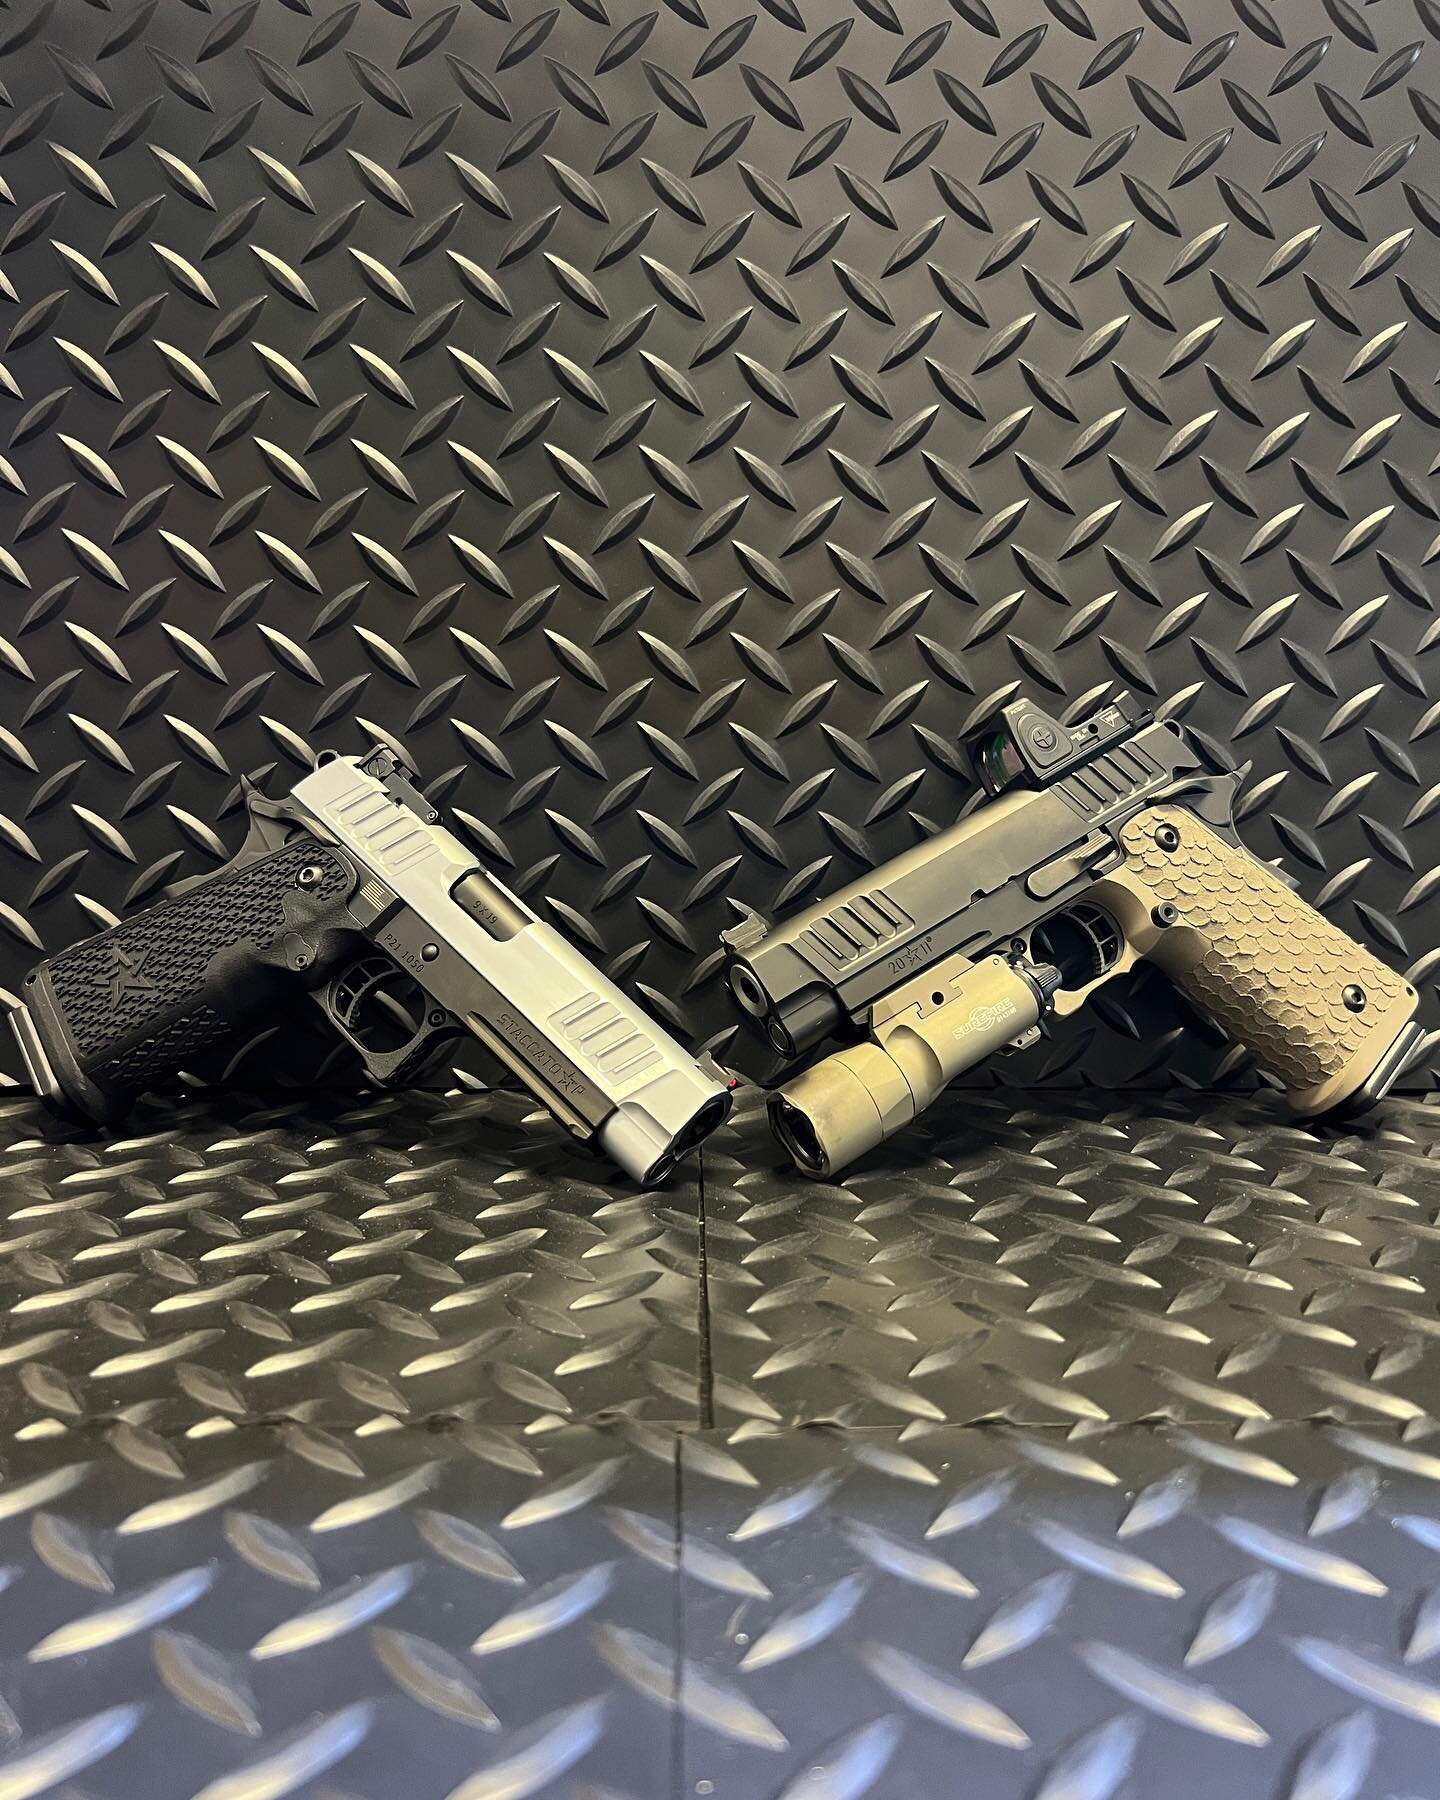 business or pleasure? pick your poison
Left: Staccato P Tuxedo (Discontinued)
Right: Staccato P DPO w/RMR, x300, and 
  FDE dragon scales grip
#staccatop #stacattopdpo #rmr #hardchrome #southflorida #guns